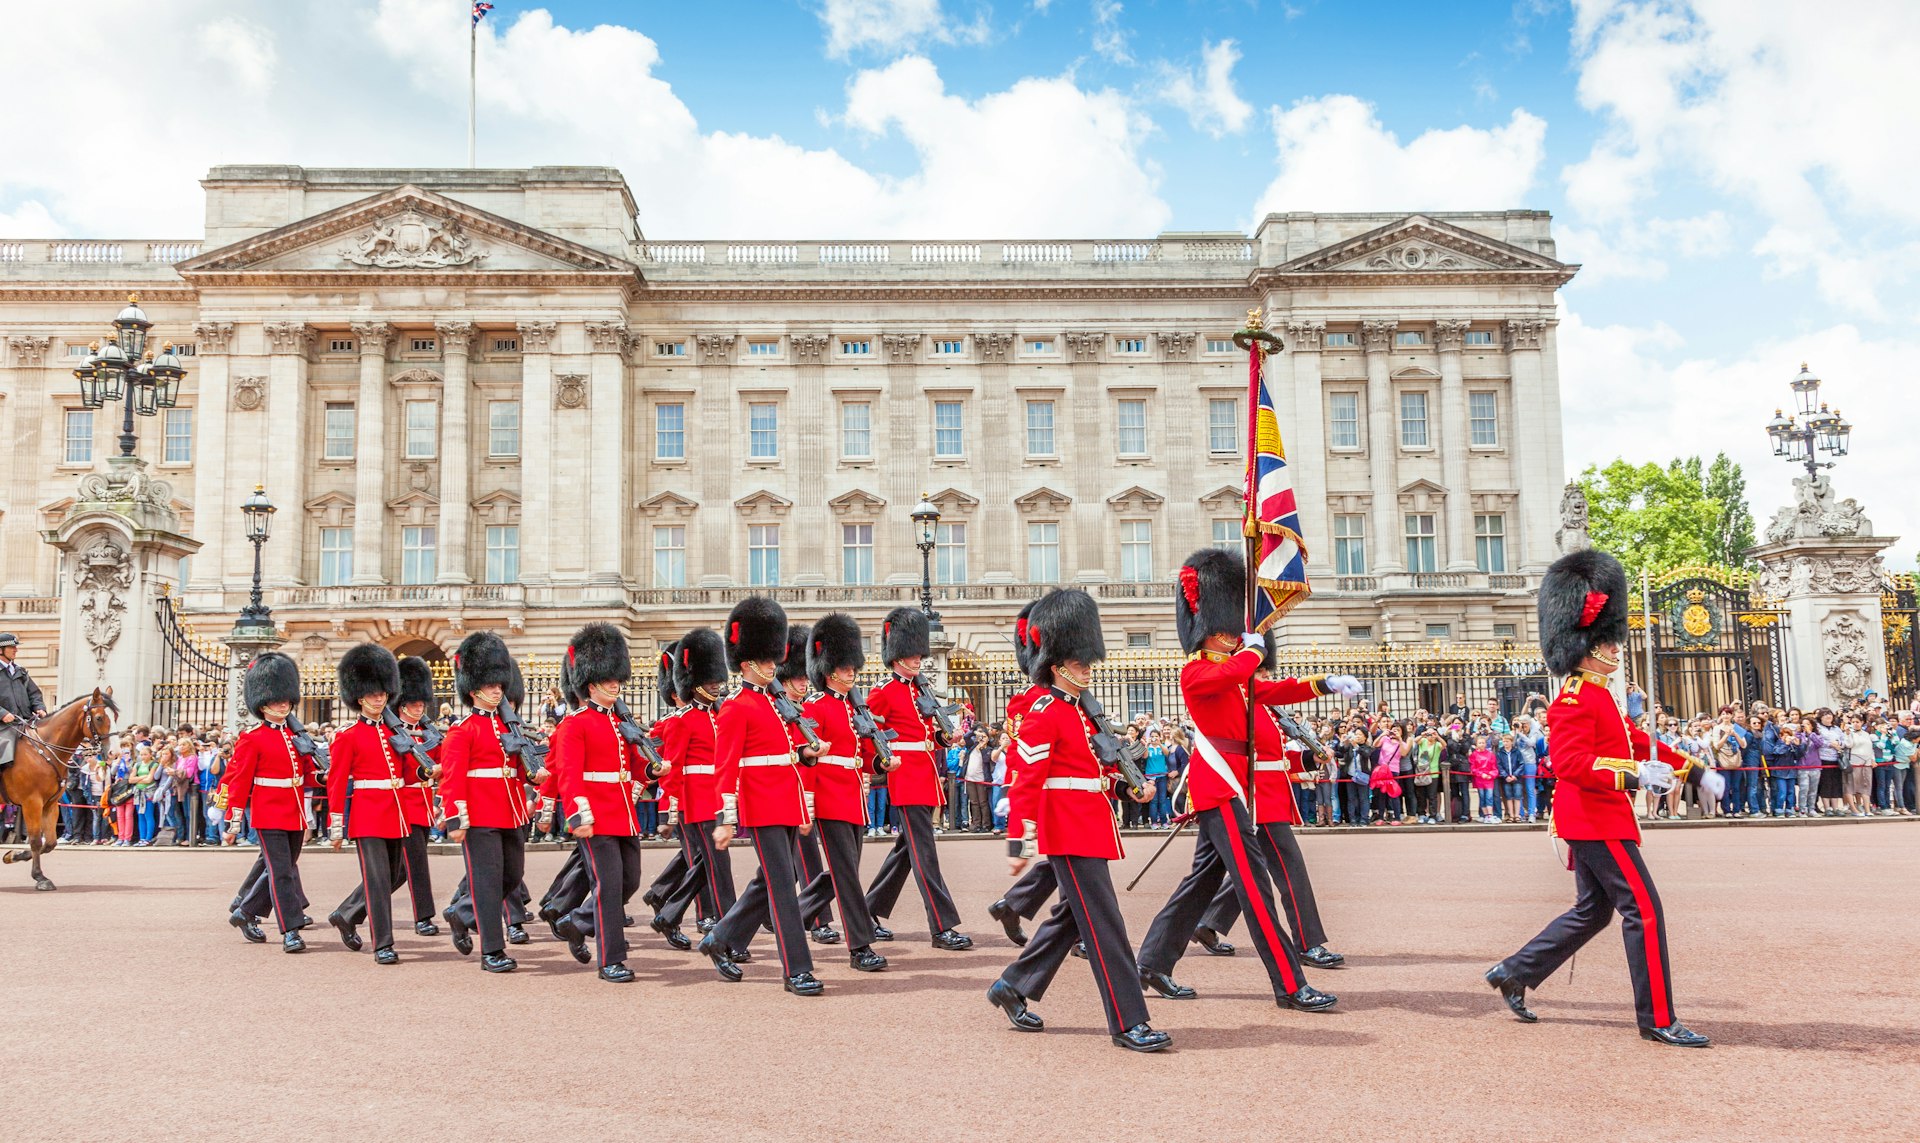 Officers and soldiers of the Coldstream Guards march in front of Buckingham Palace during the Changing of the Guard ceremony. 